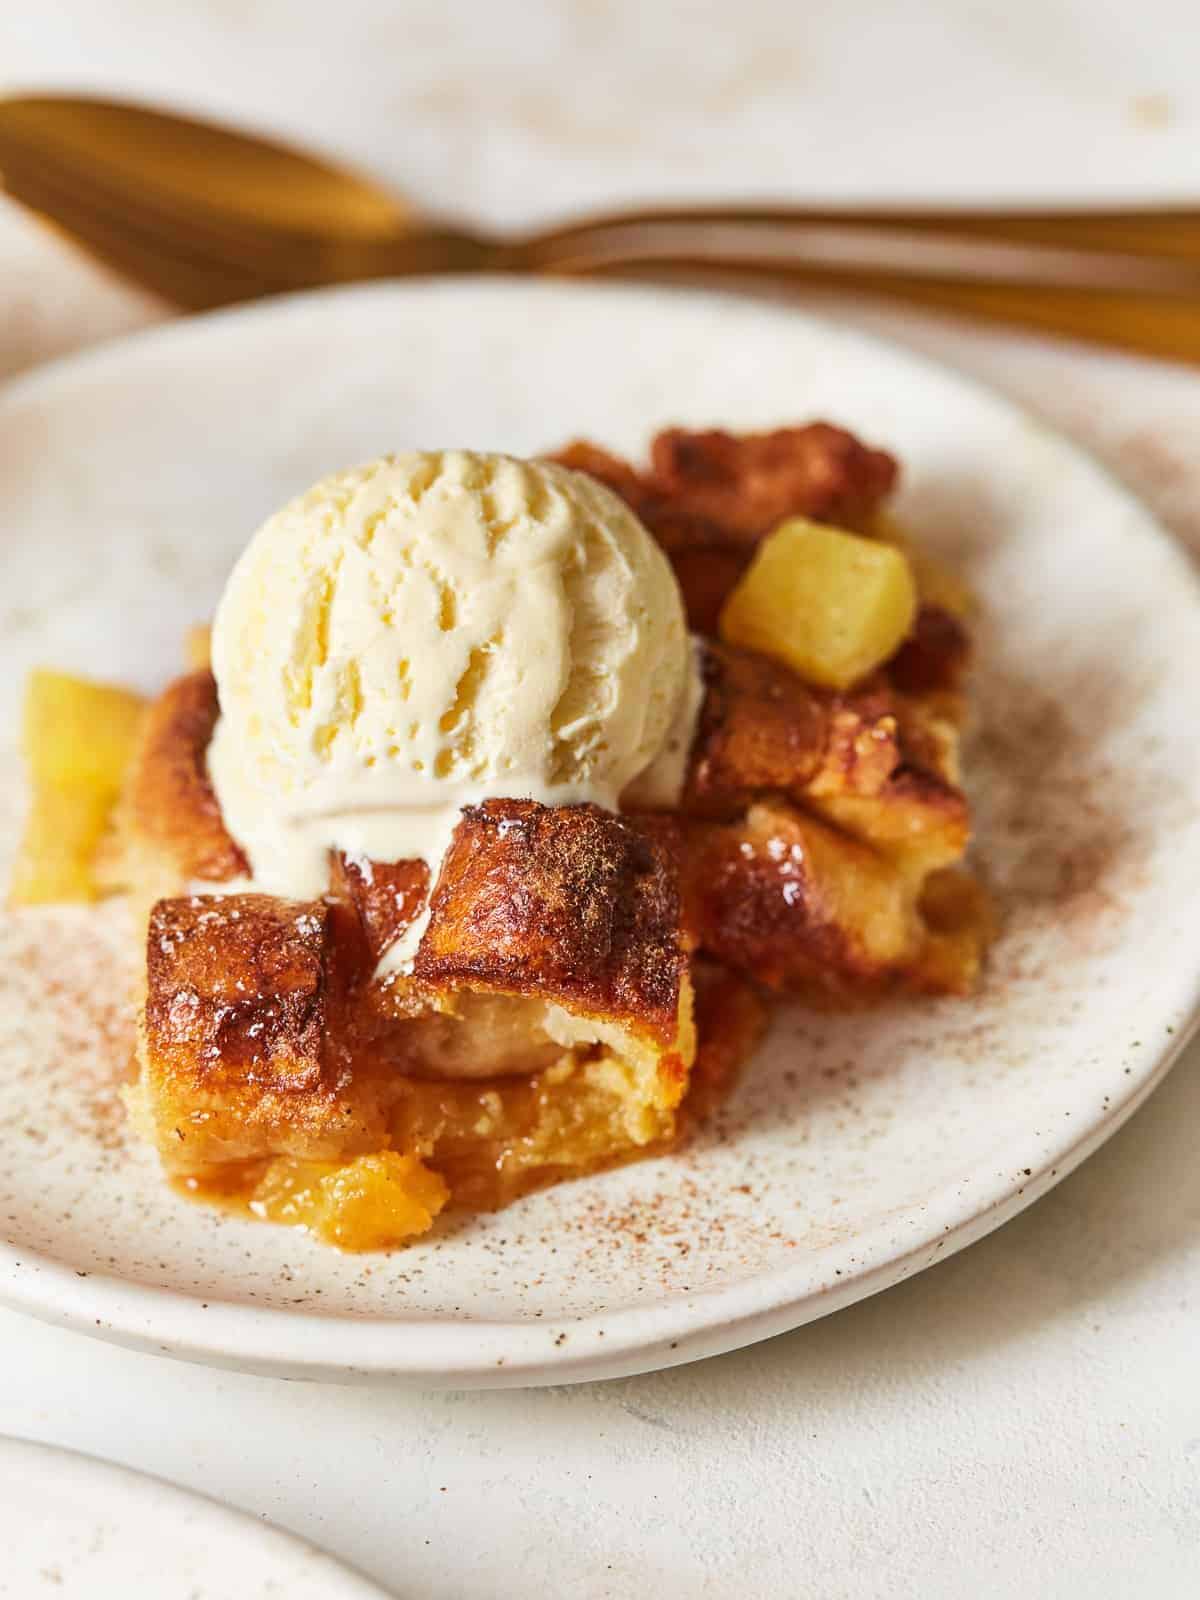 a plate of bread pudding with pineapple and a scoop of vanilla ice cream